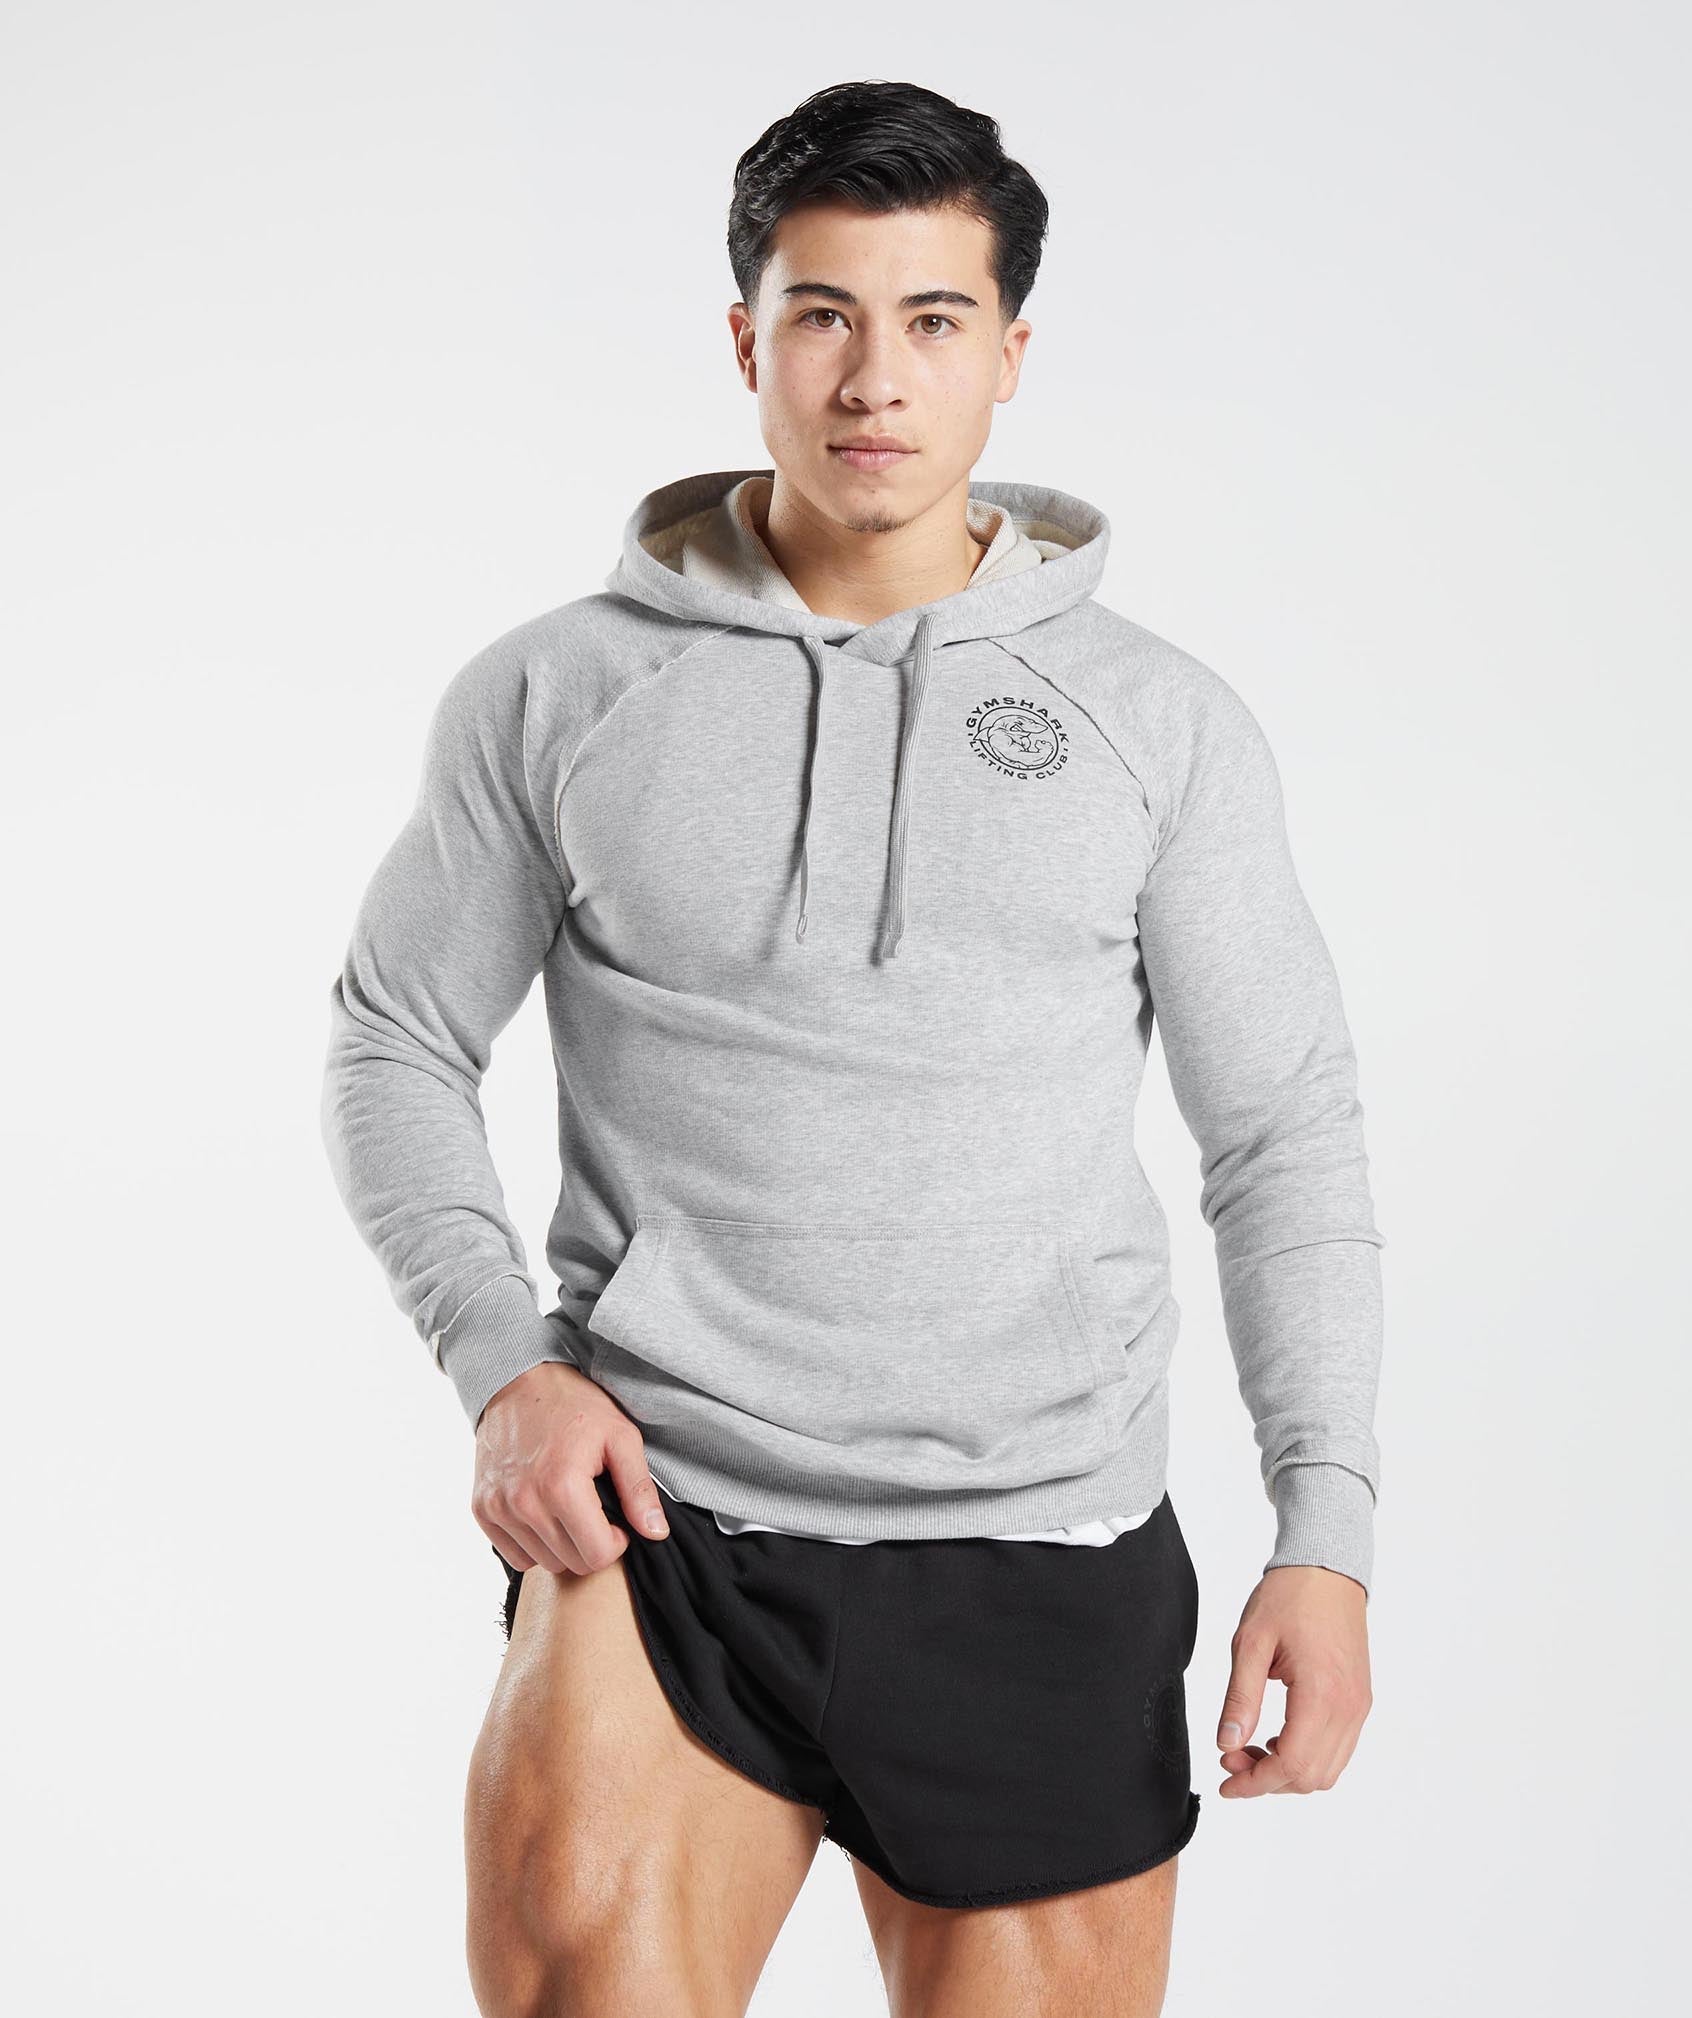 mens gymshark hoodie Size Small Gray With Graphic